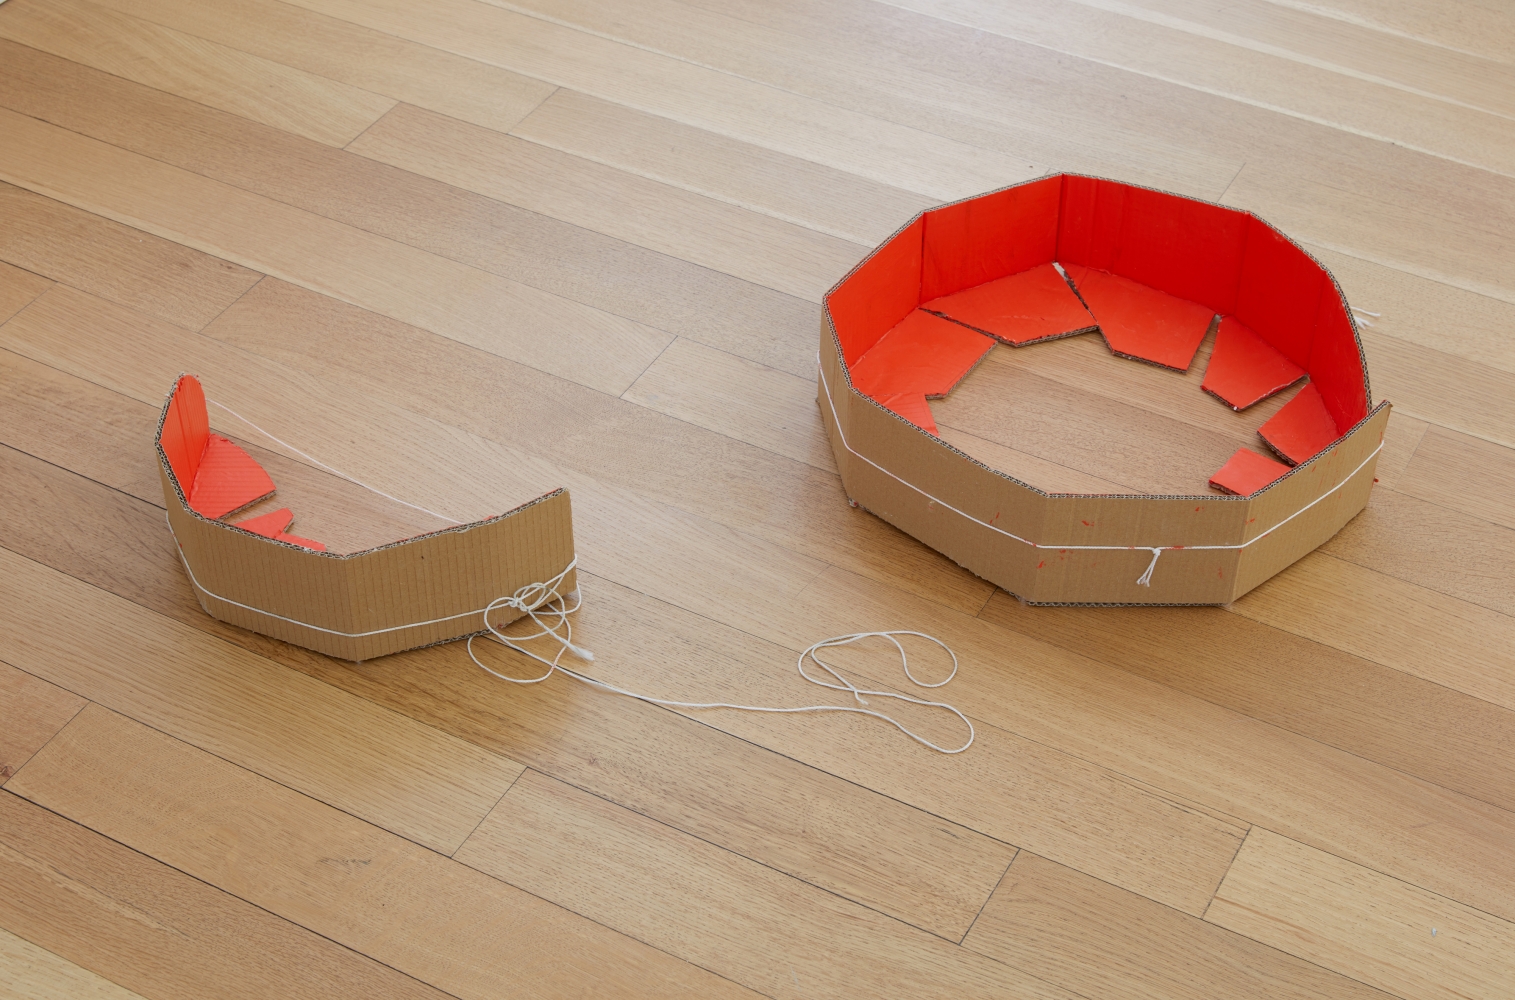 Esther Kläs SEE YOU, 2021 cardboard, paint, and string 4 1/2 x 36 x 31 inches (11 x 91 x 79 cm), overall